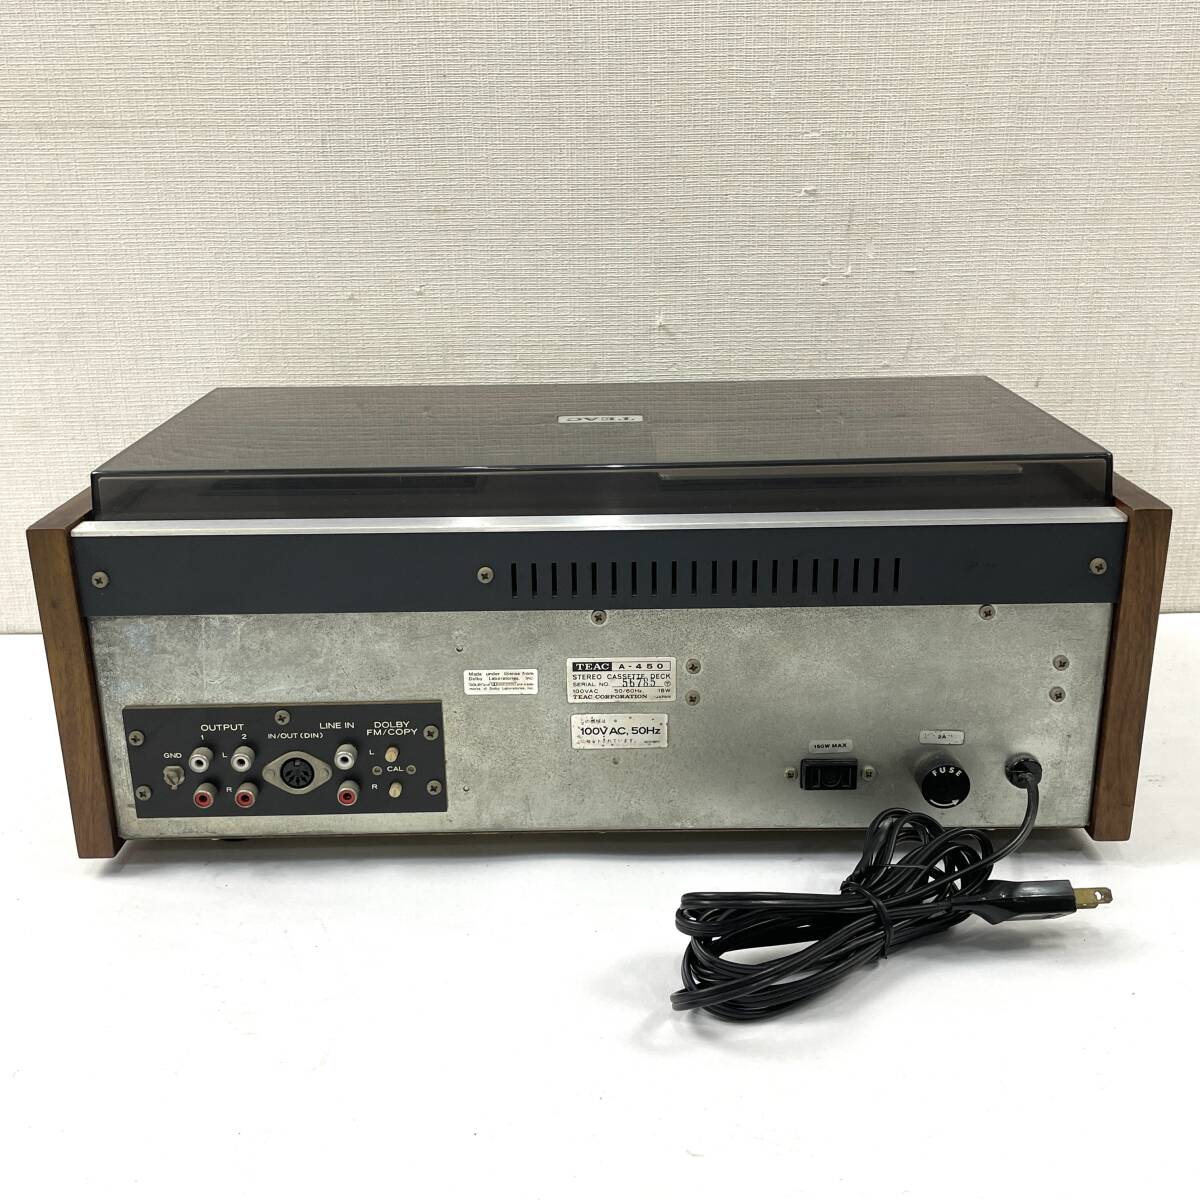 TEAC カセットデッキ A-450 説明書付き ティアック【ジャンク】24B 北TO2_画像7